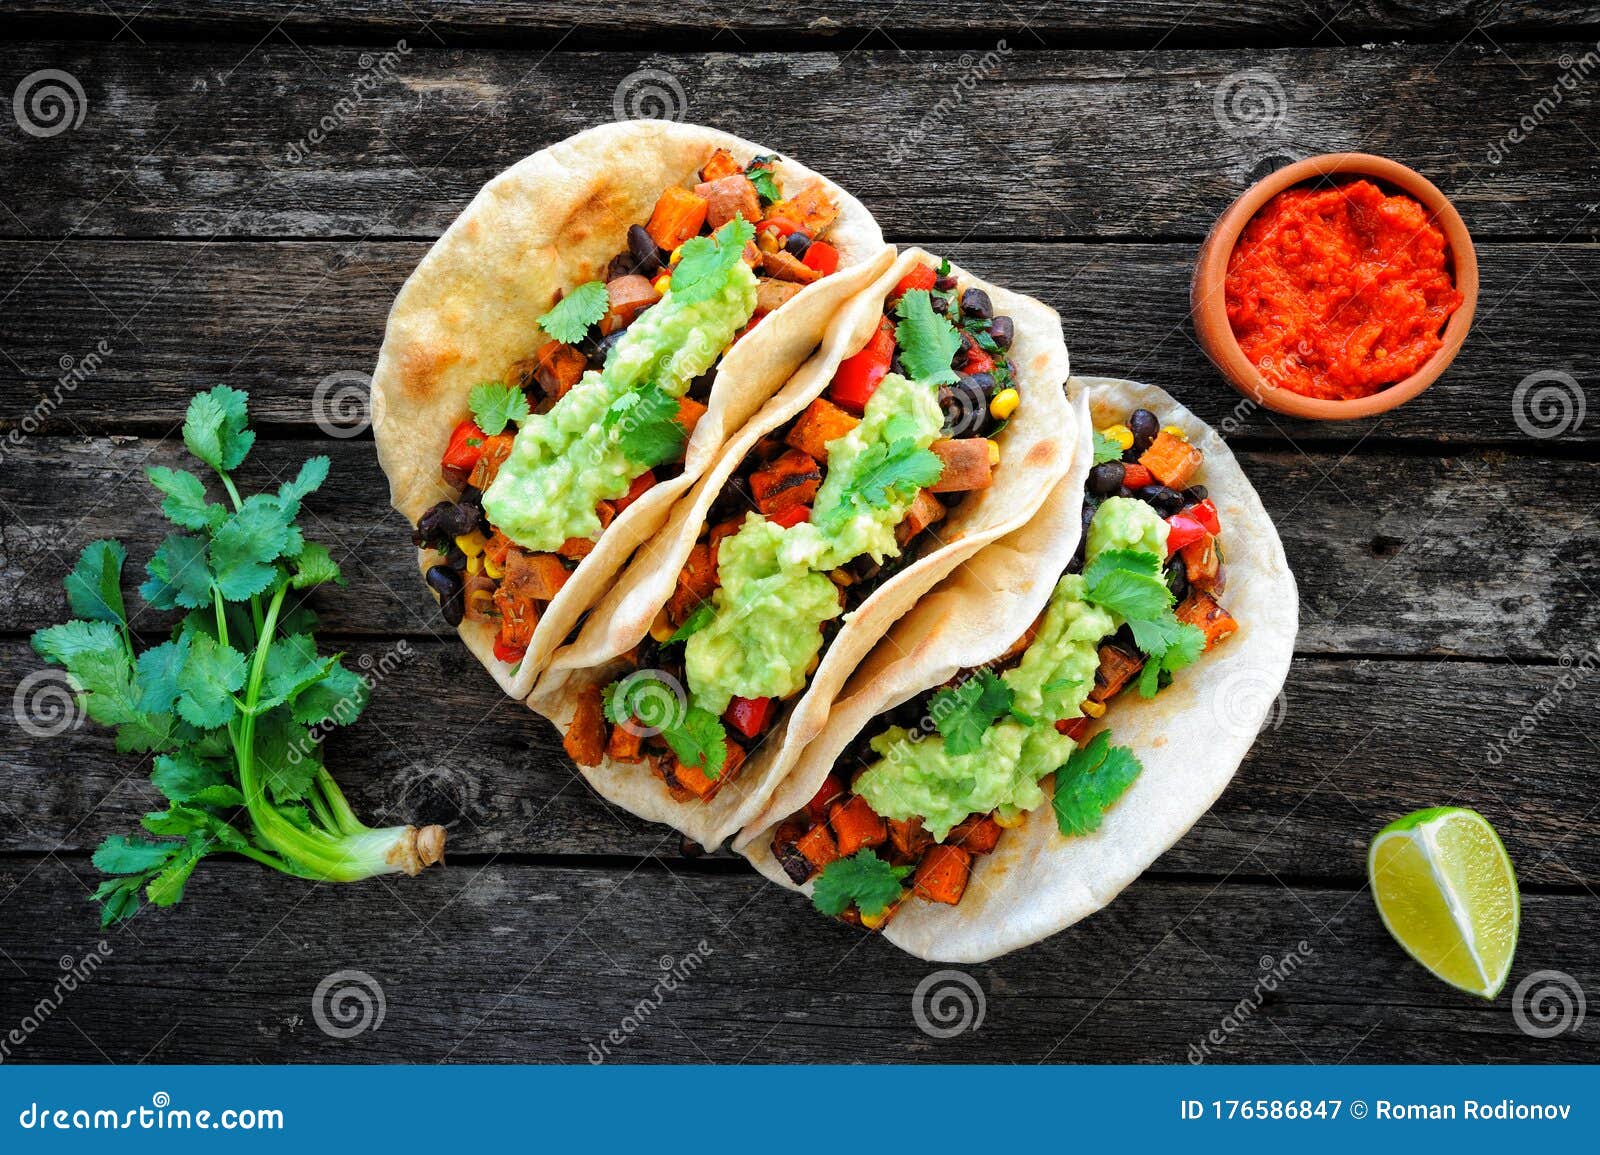 vegan tacos with black beans, sweet potato and guacamole and tortillas flatbread